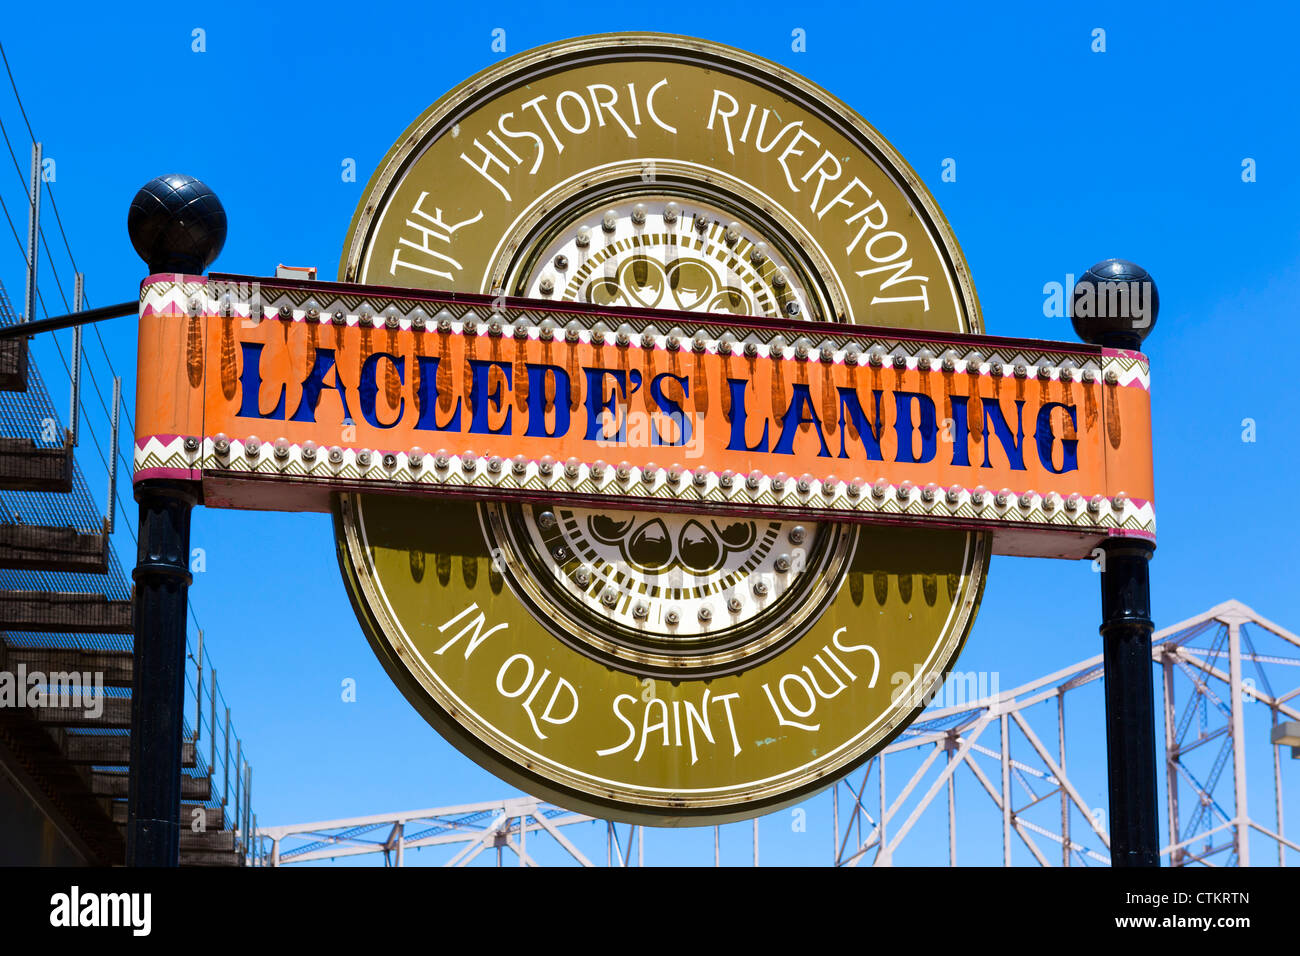 Sign for Laclede's Landing on the historic riverfront, St Louis, Missouri, USA Stock Photo